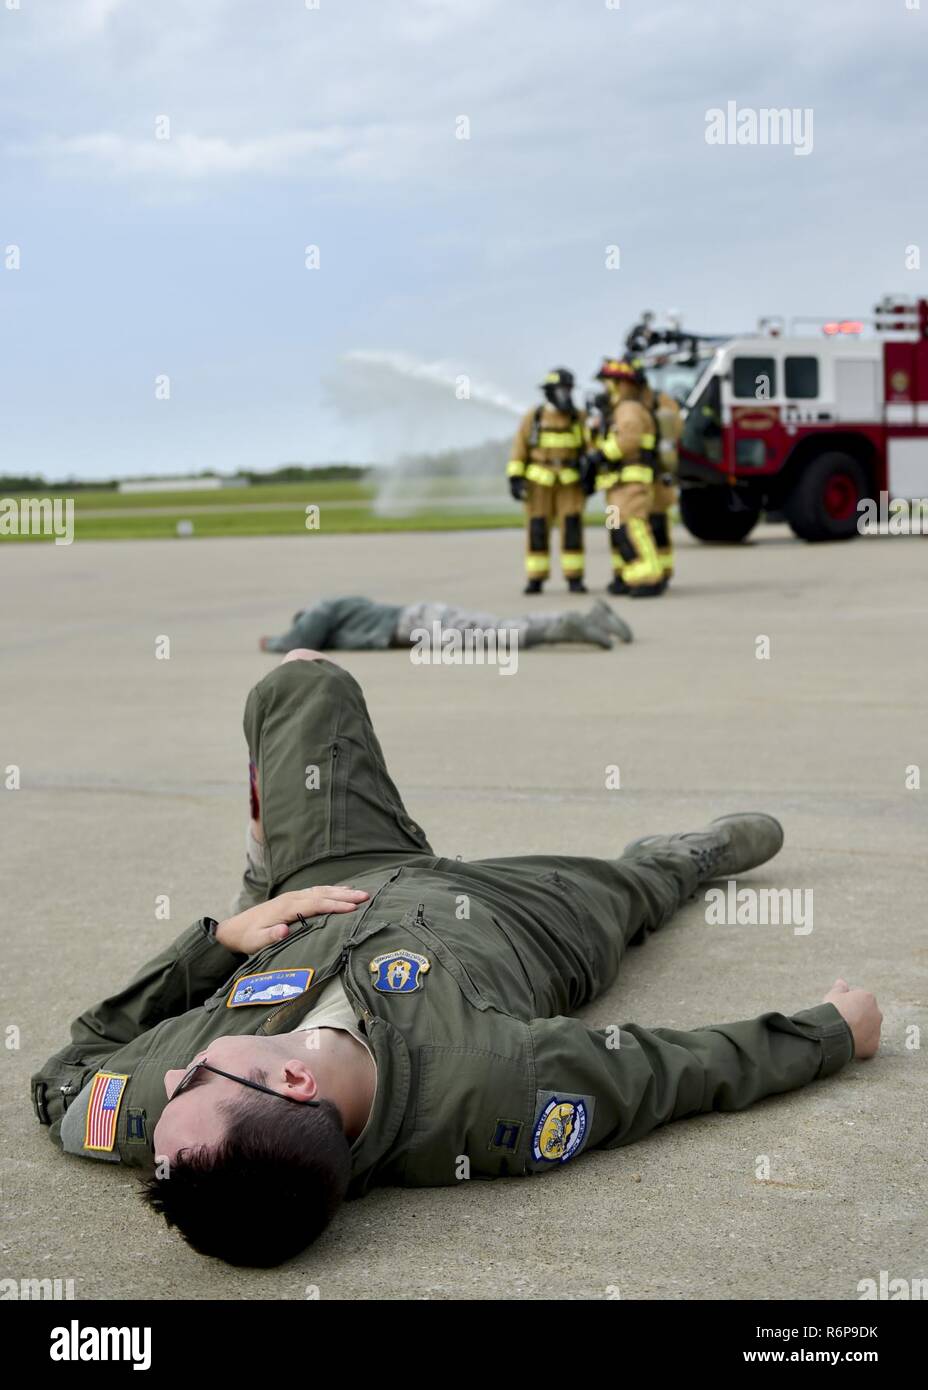 Capt. Matt McKay, a pilot trainee with the 757th Airlift Squadron here, portrays an accident victim during a Major Accident Response Exercise (MARE), May 16, 2017, while installation firefighters arrive and coordinate their initial response. The purpose of the exercise, conducted by the Wing Inspection Team and Emergency Management office, was to document response capabilities of installation personnel while honing joint response practices with local agencies including local law enforcement and the American Red Cross. Stock Photo